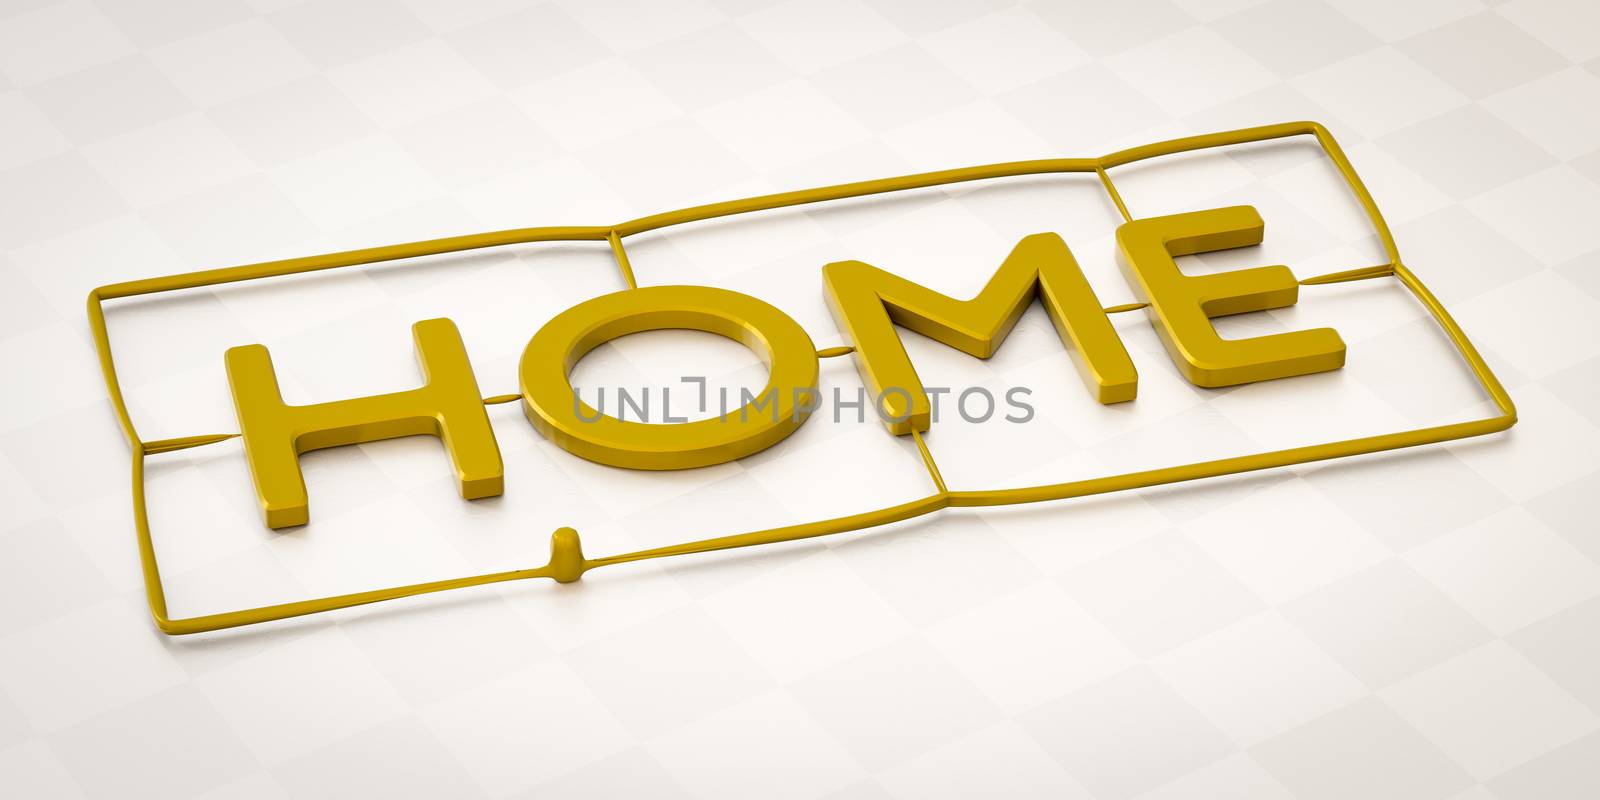 3d illustration of a plastic injection molding word home